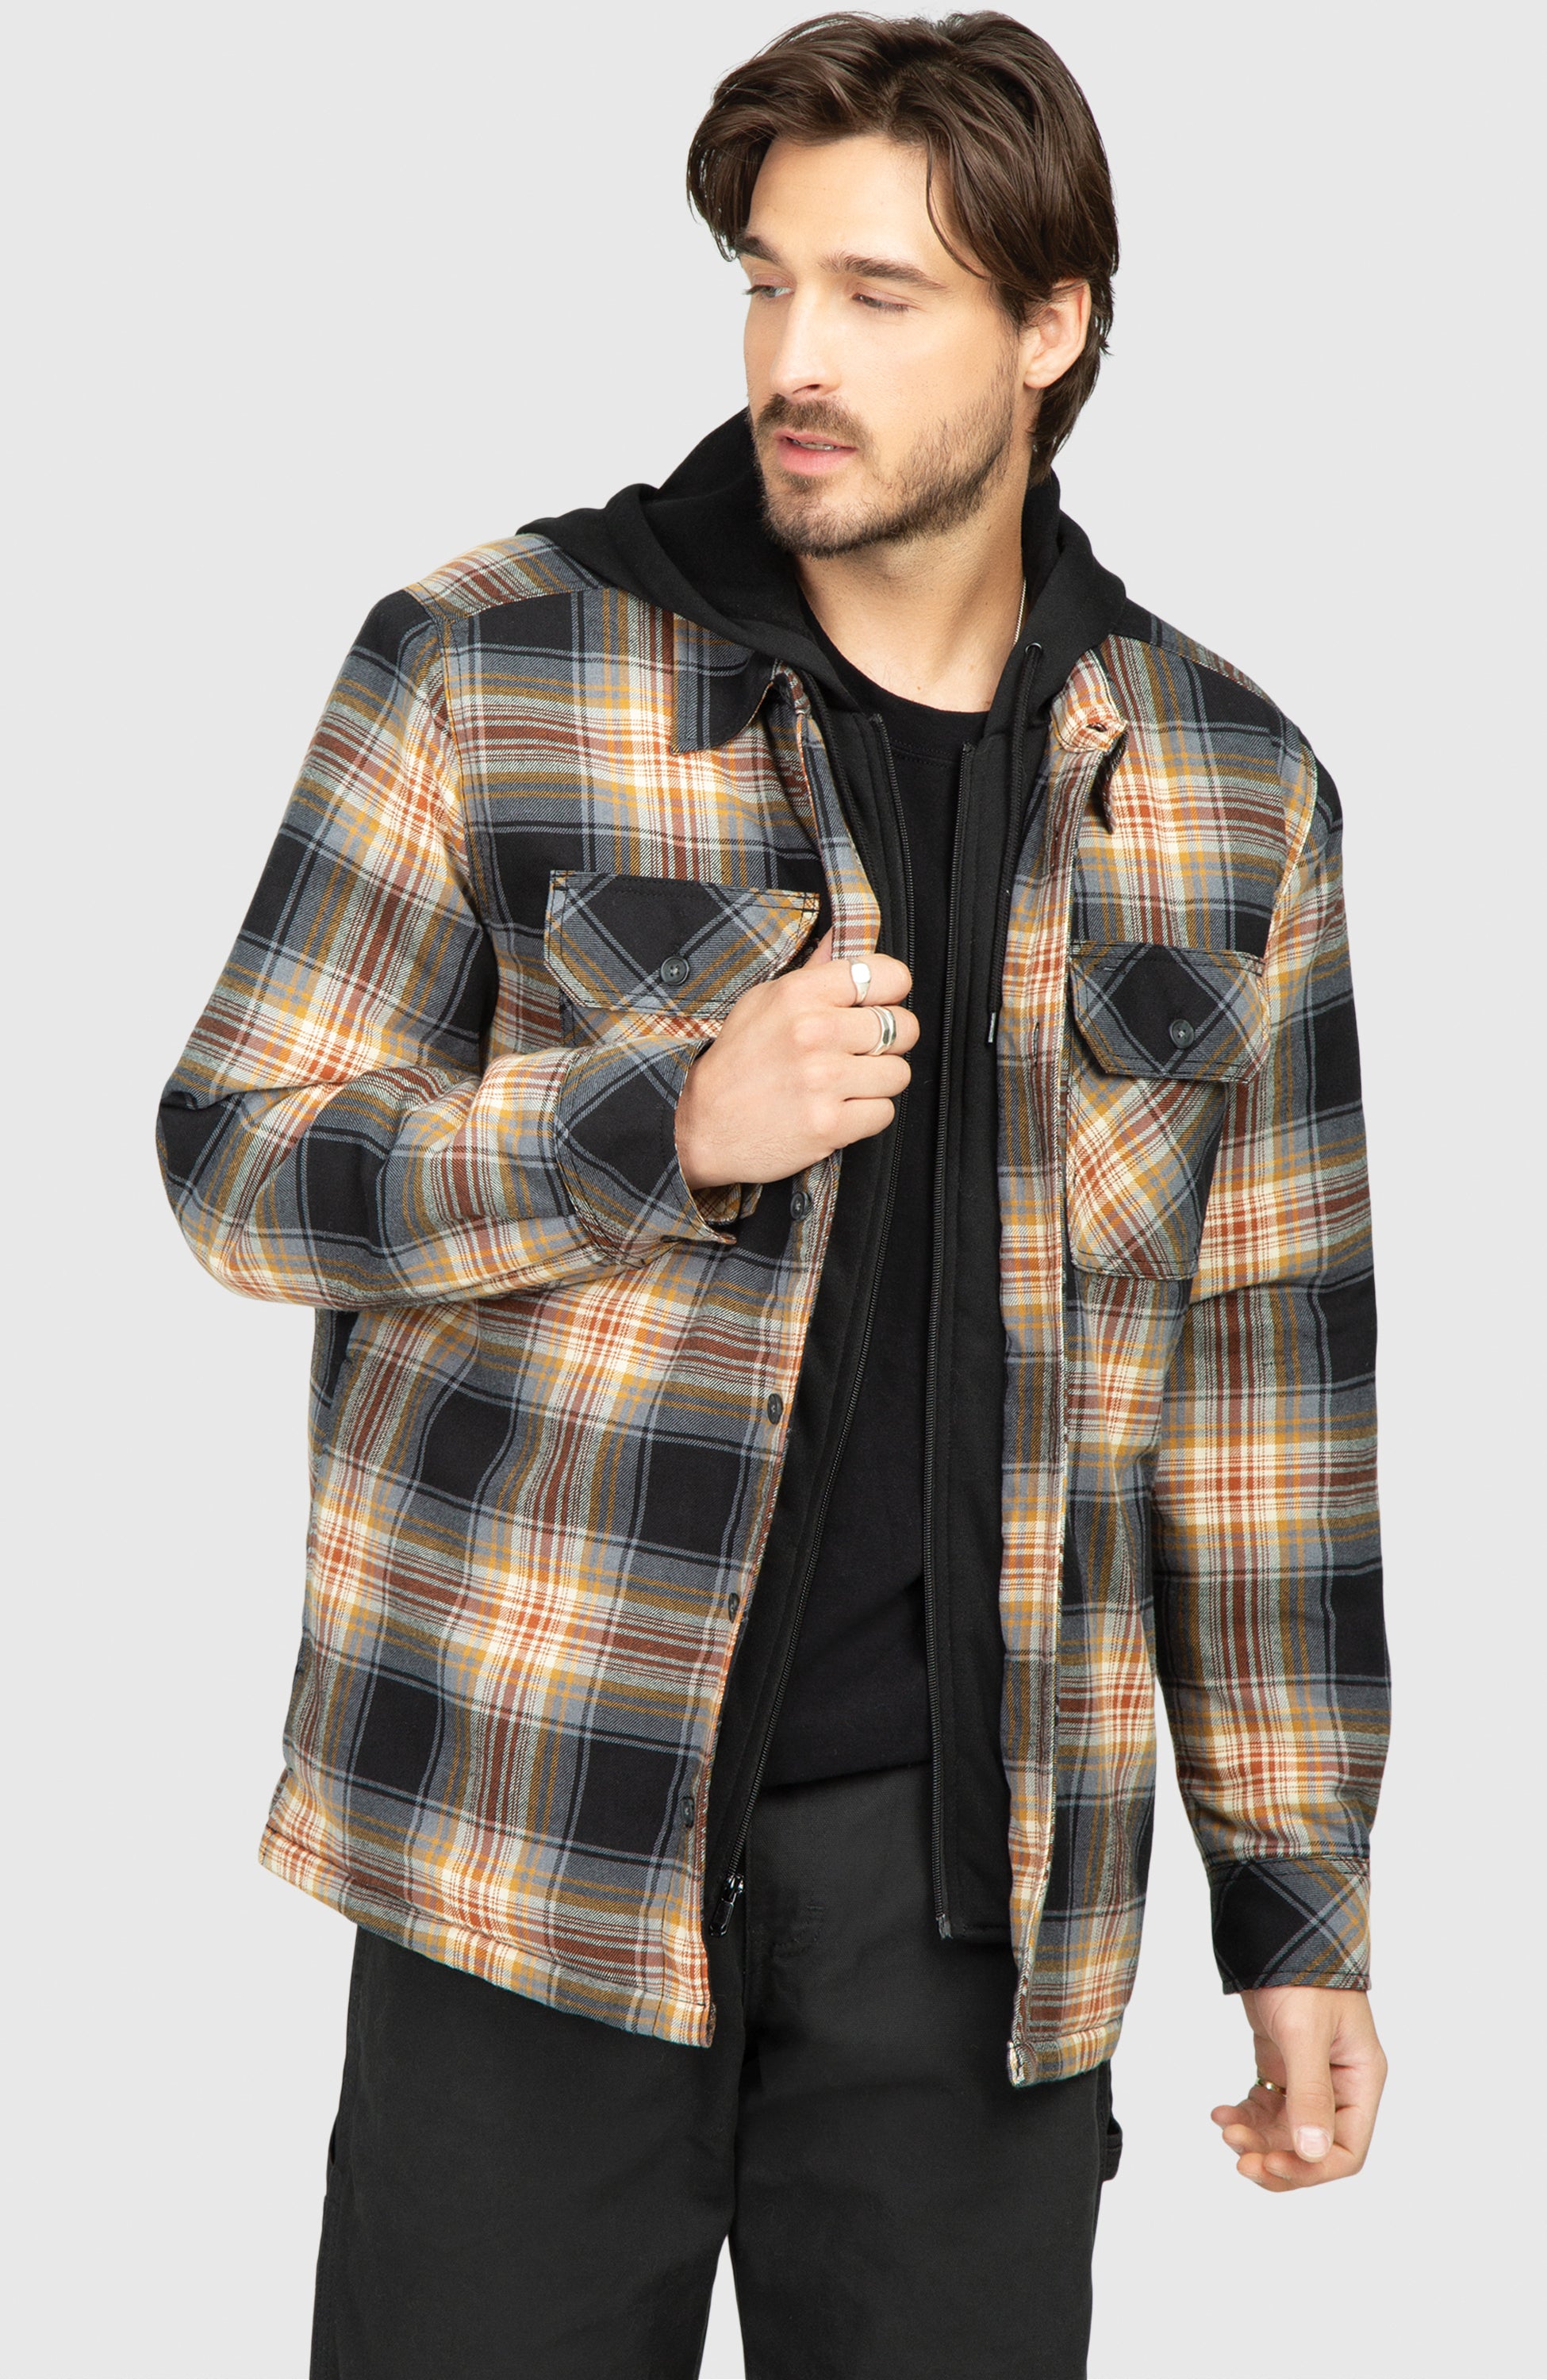 Men's Plaid Flannel Shirt Jacket Fully Quilted Lined 5 Pocket Warm Zip-Up  Hoodie | eBay